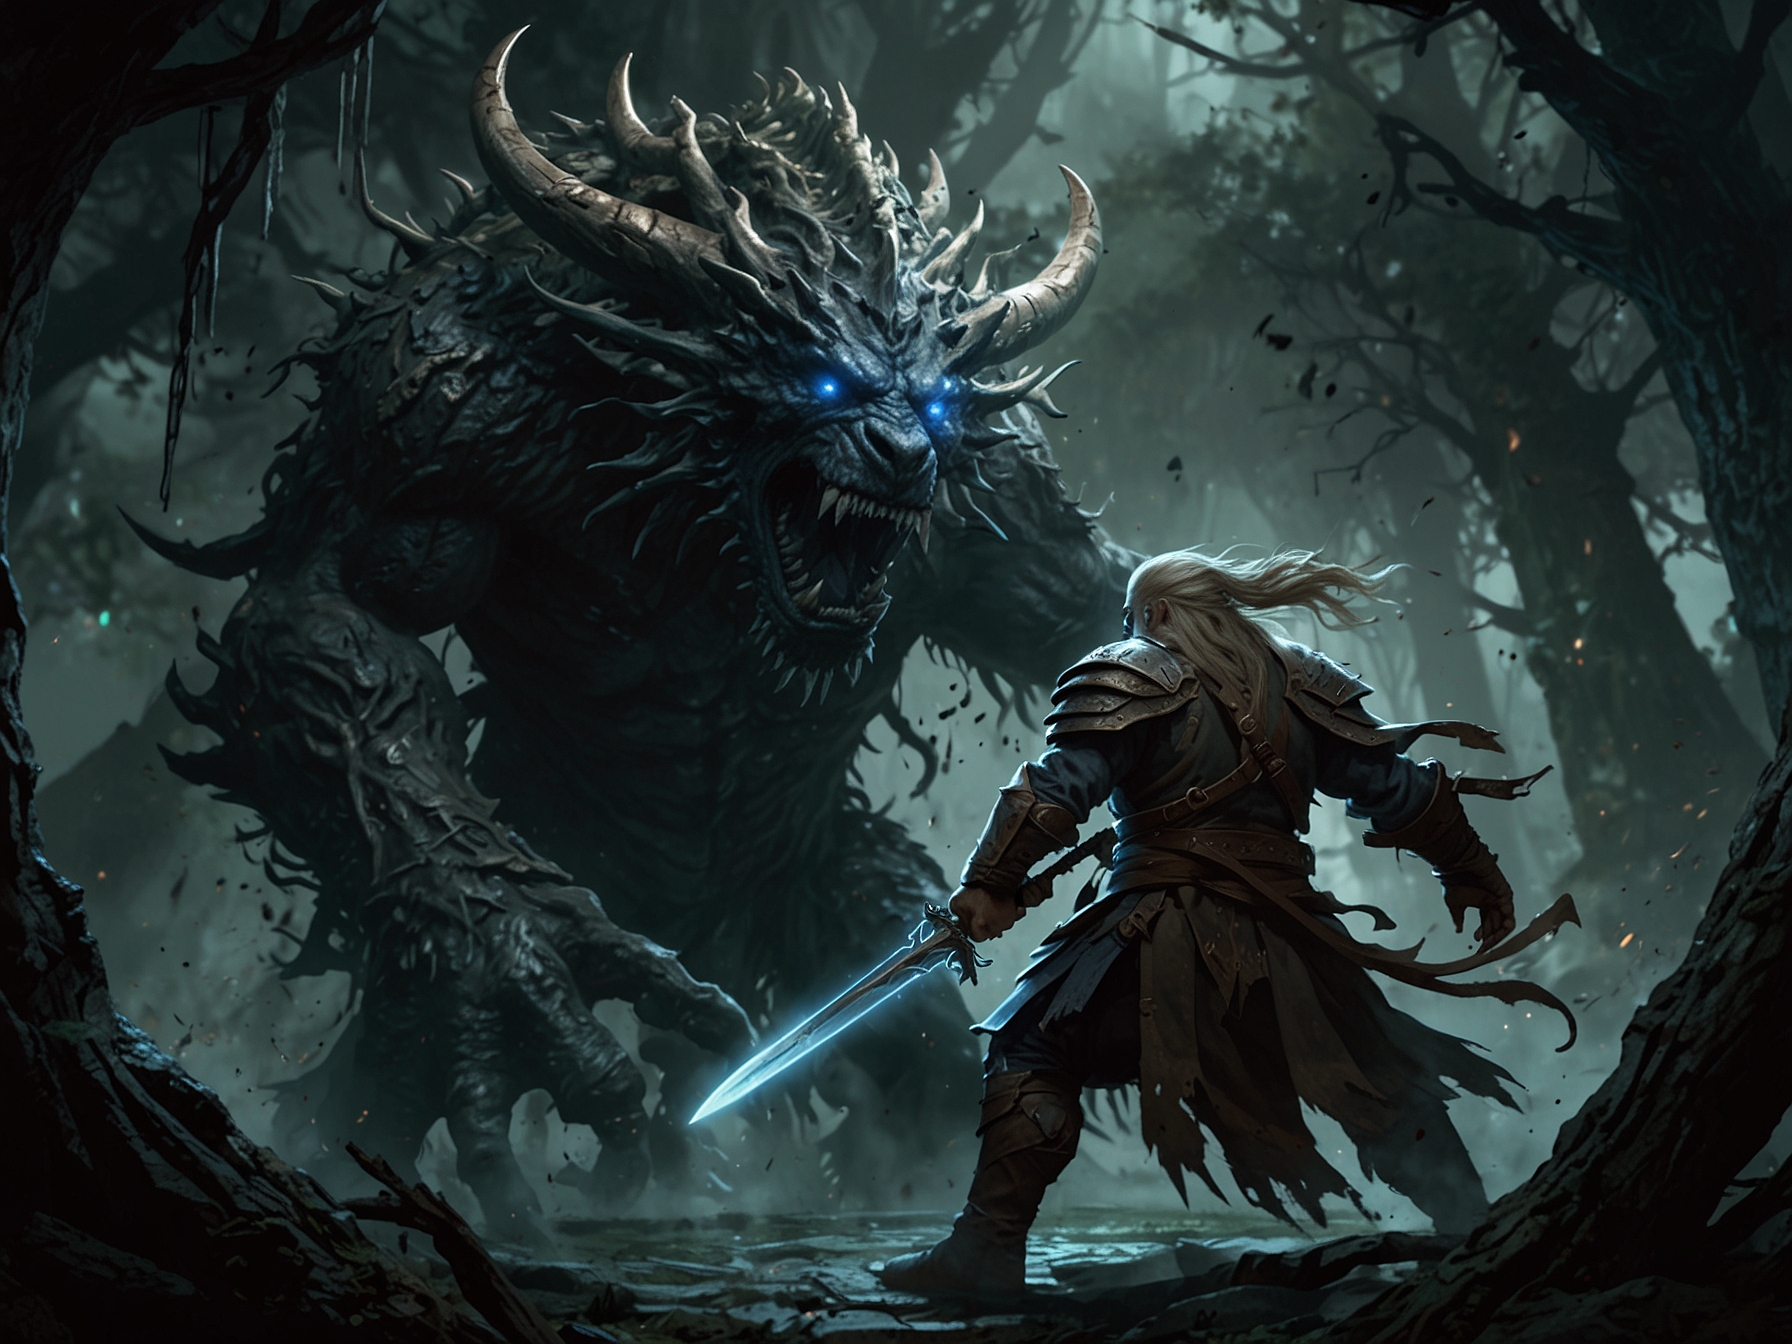 Illustration of a player character battling the Erdtree boss in Elden Ring, highlighting the boss's diverse and challenging attack patterns that require precise timing and quick reflexes.